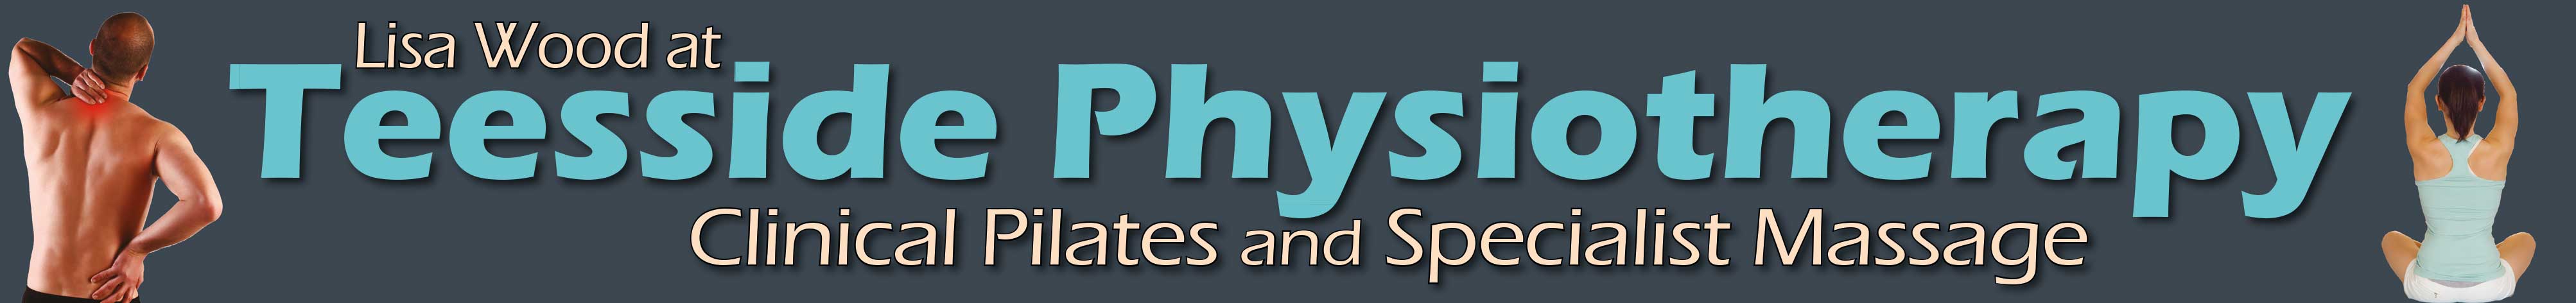 Teesside Physiotherapy